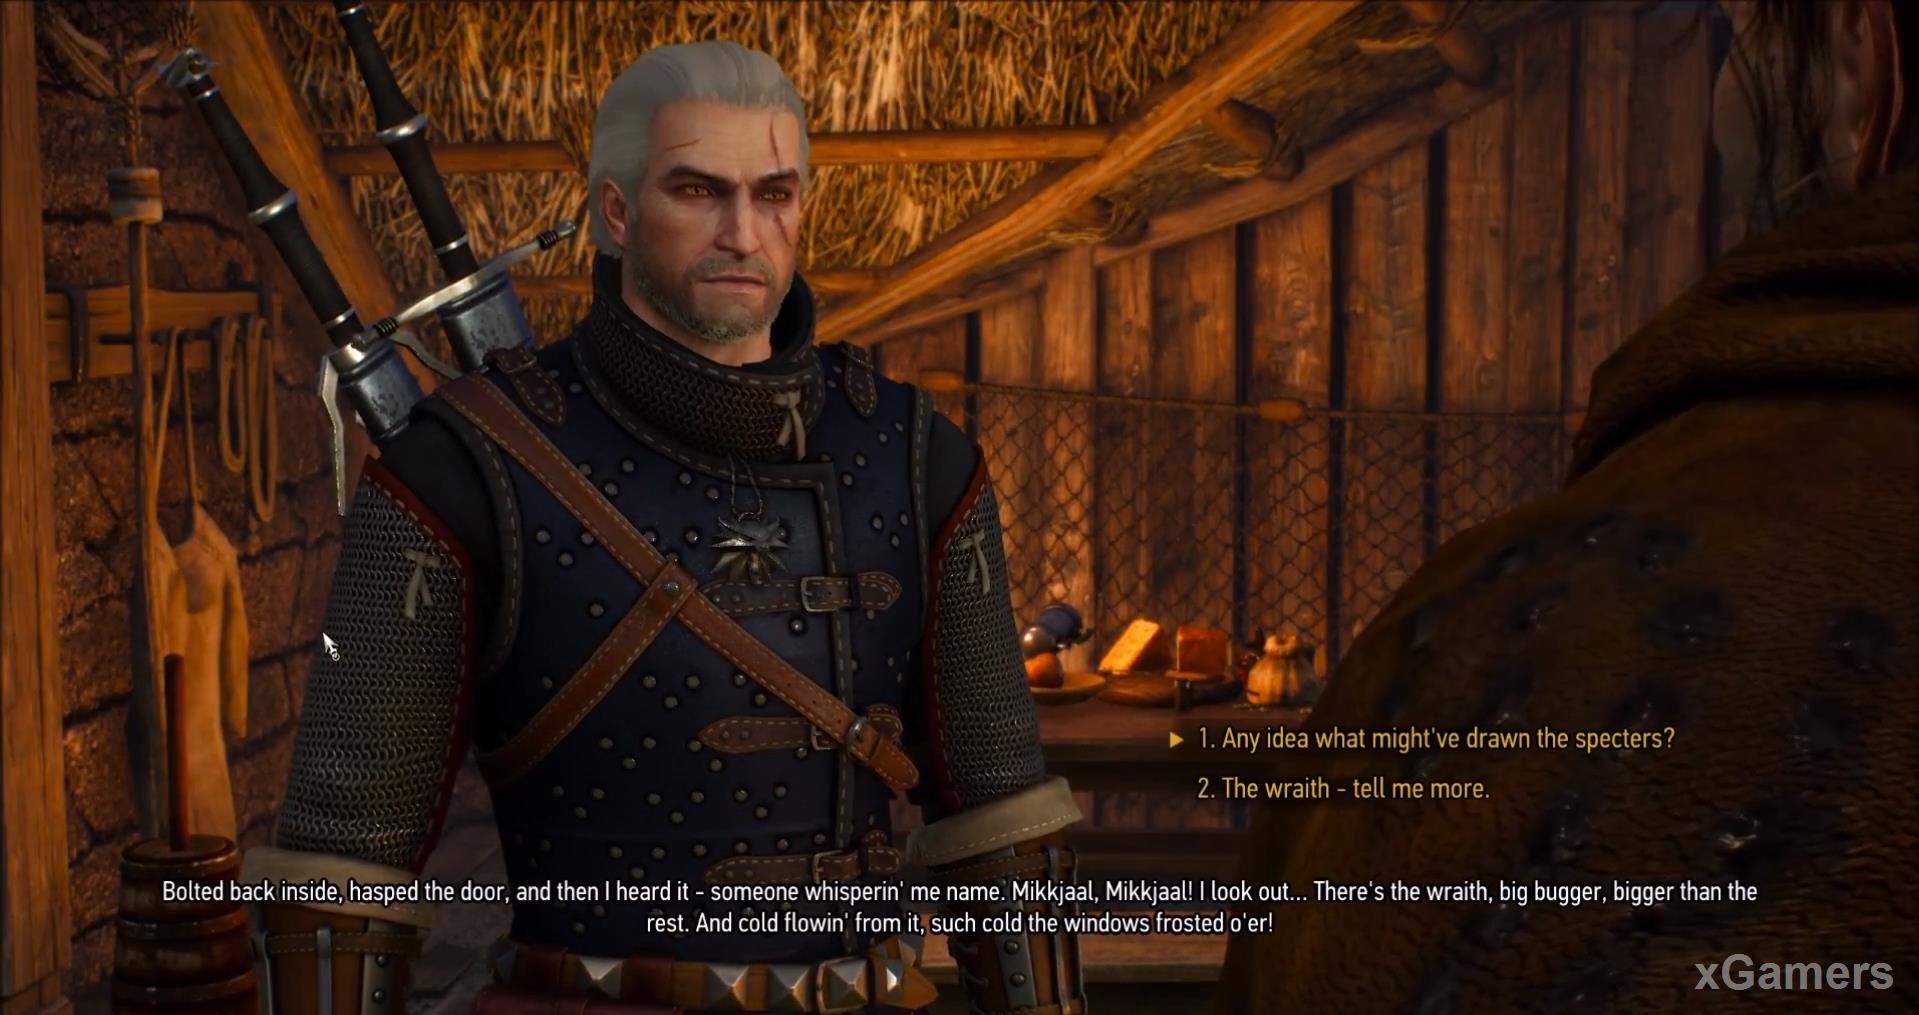 Geralt learns, that appeared they immediately after, as fires of beacon extinguished